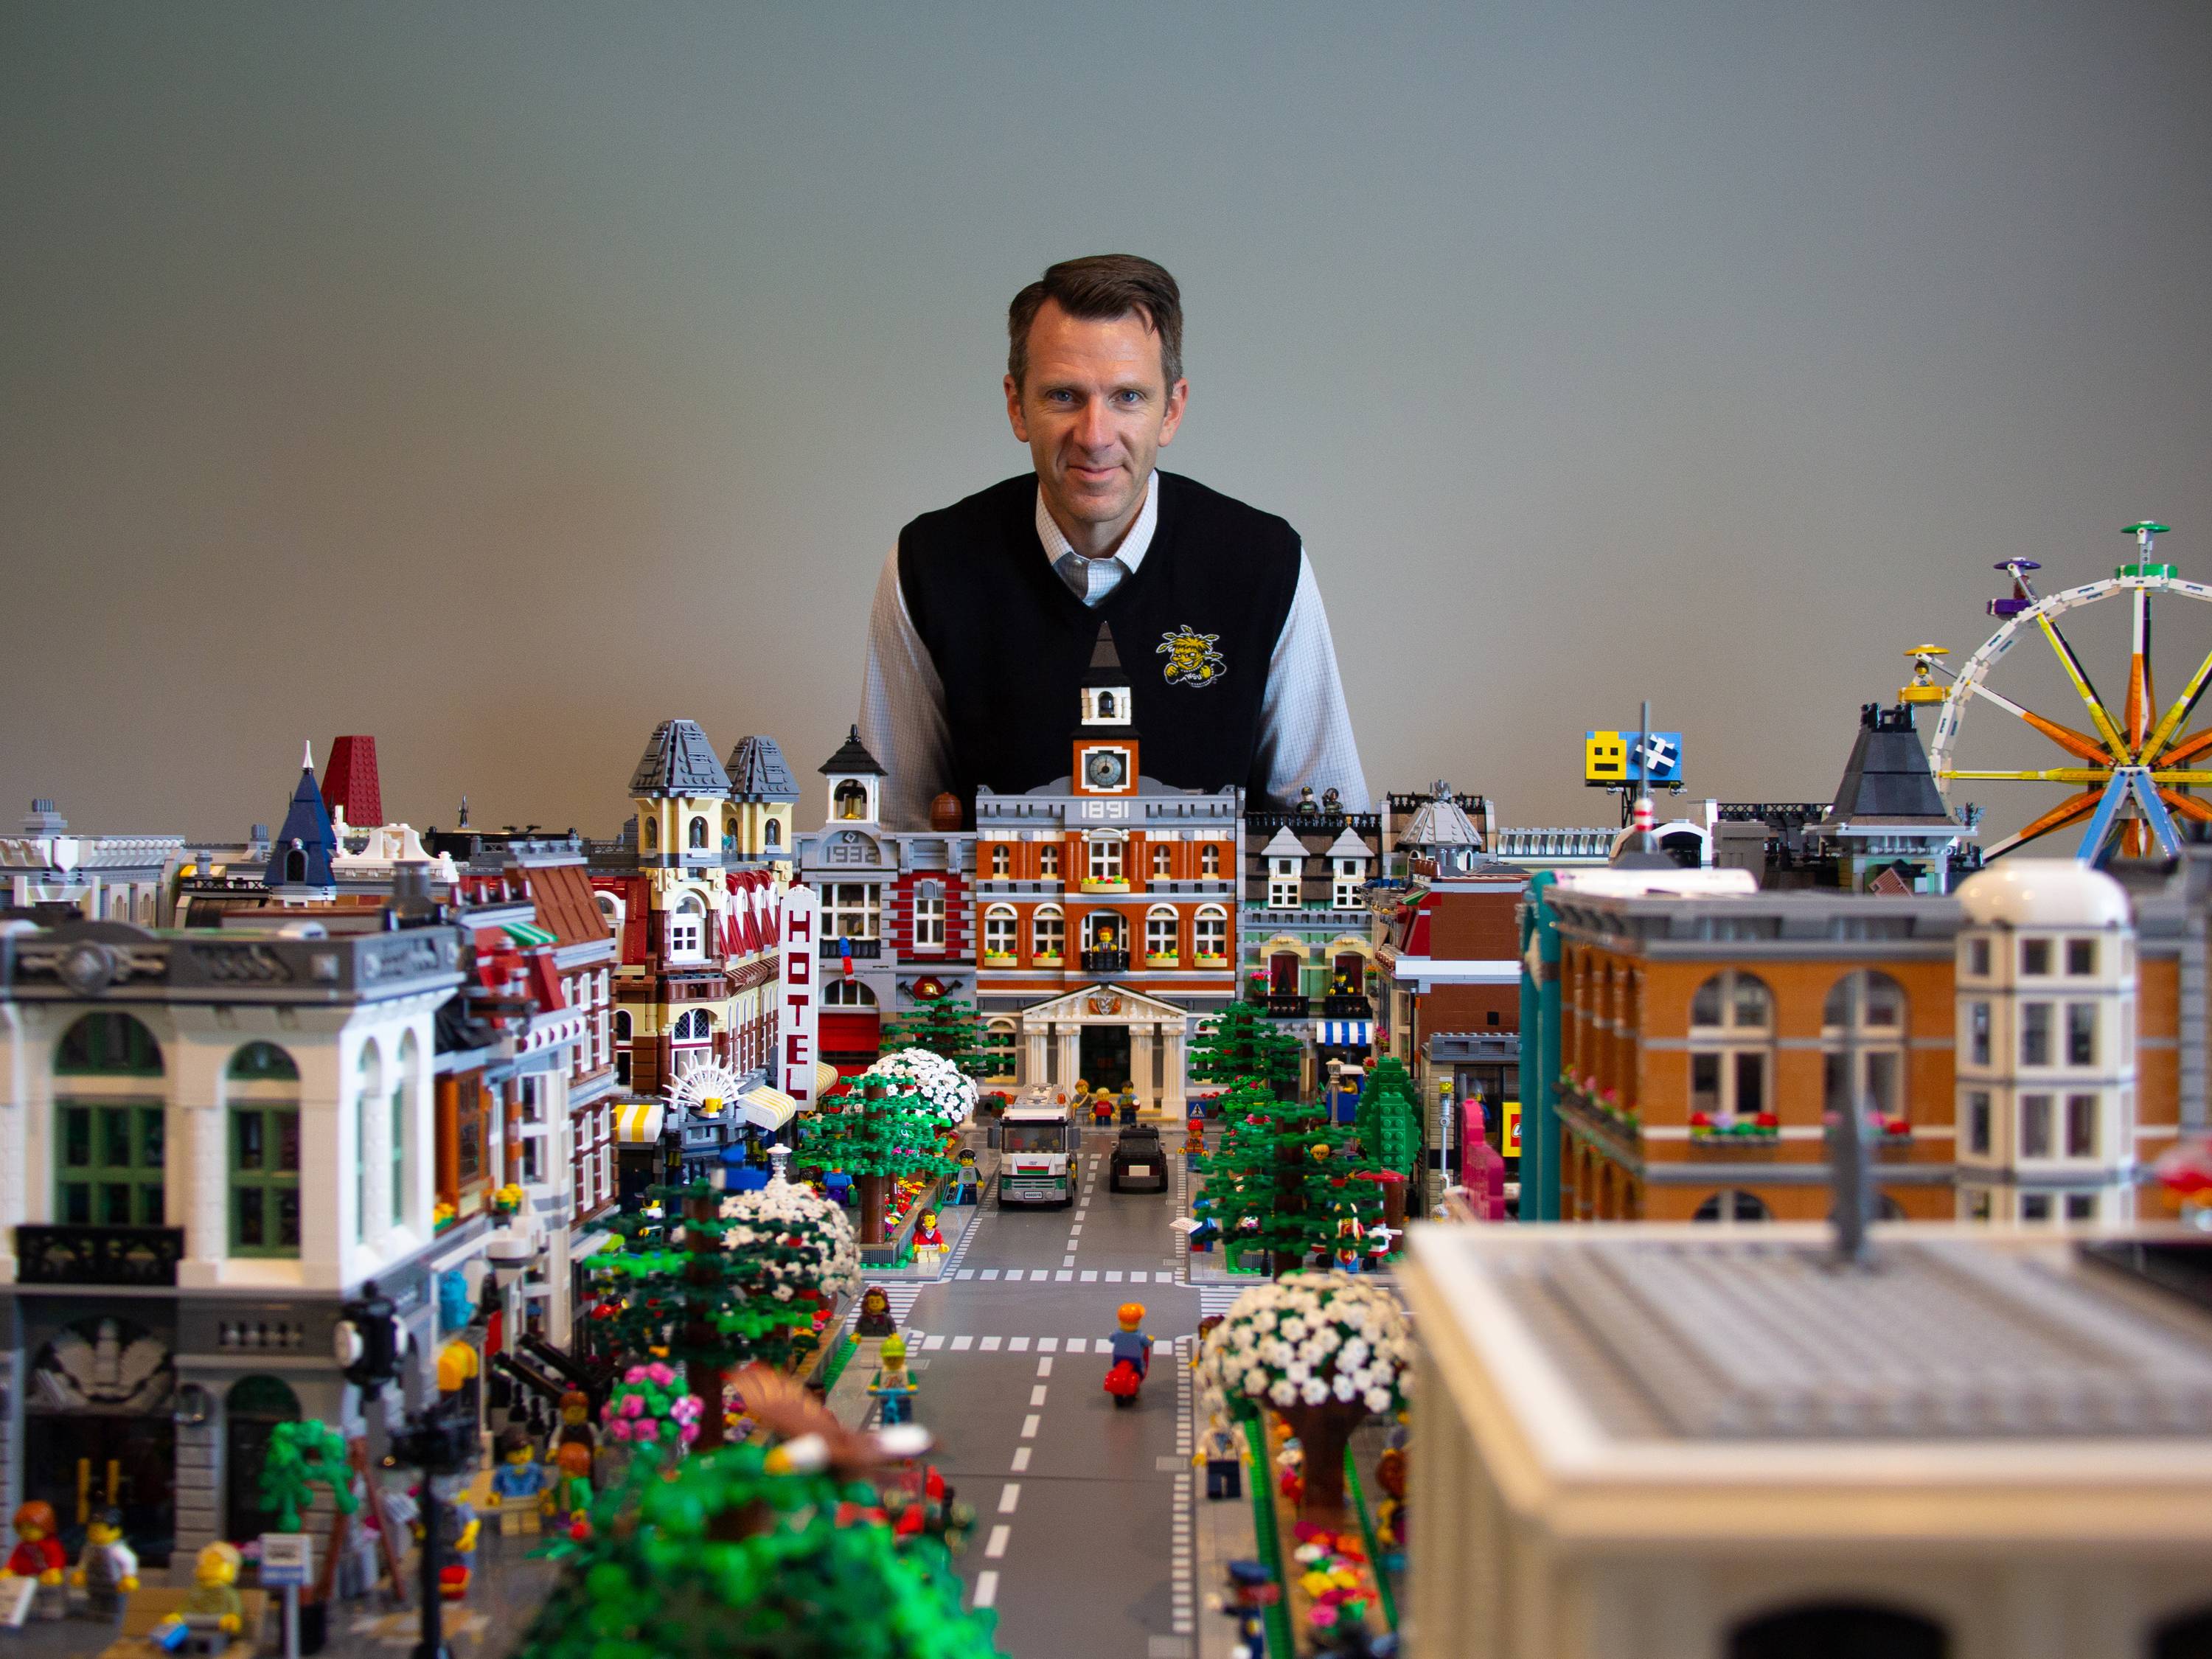 Charles Keasing puree tint Engineering dean gets creative with his own LEGO city | Wichita State News